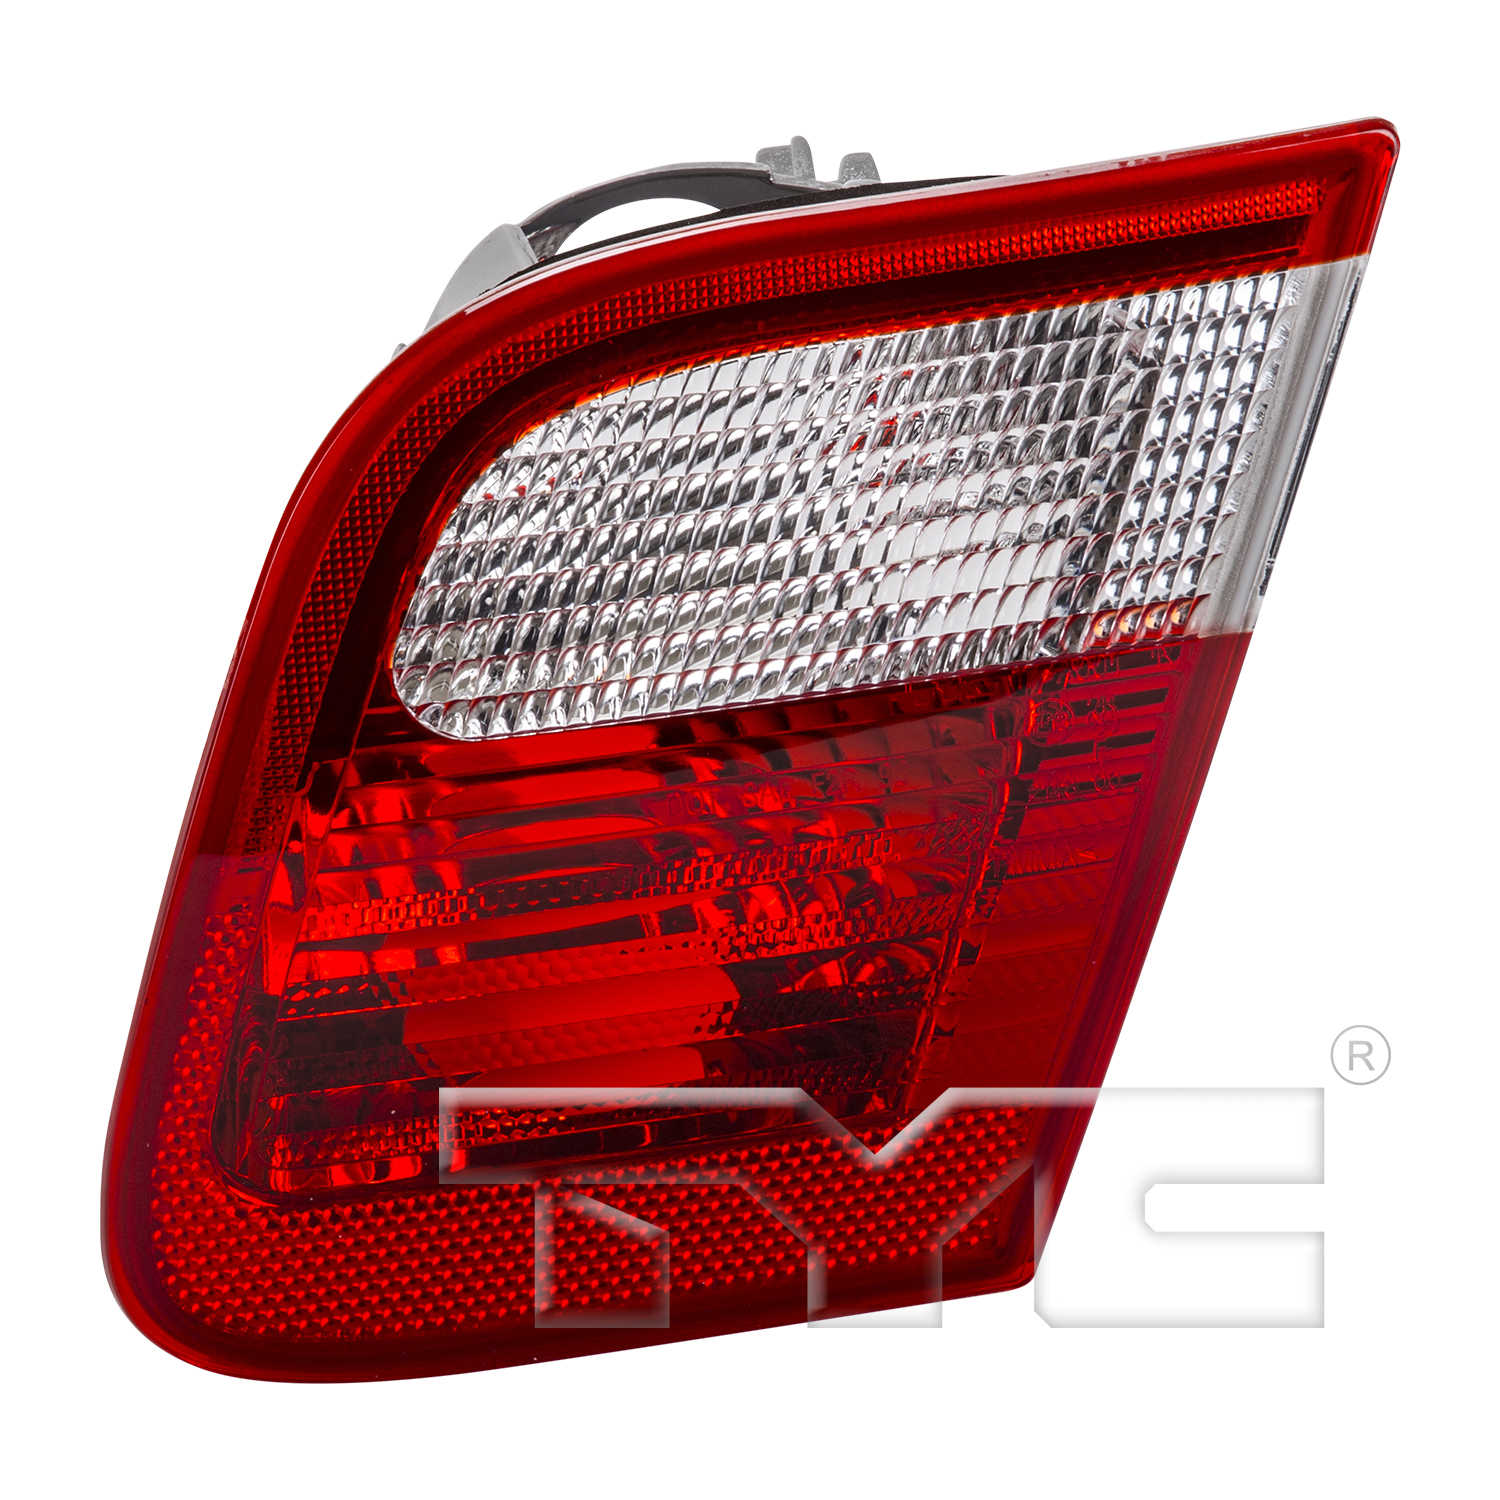 Aftermarket TAILLIGHTS for BMW - 325I, 325i,01-01,RT Back up lamp assy